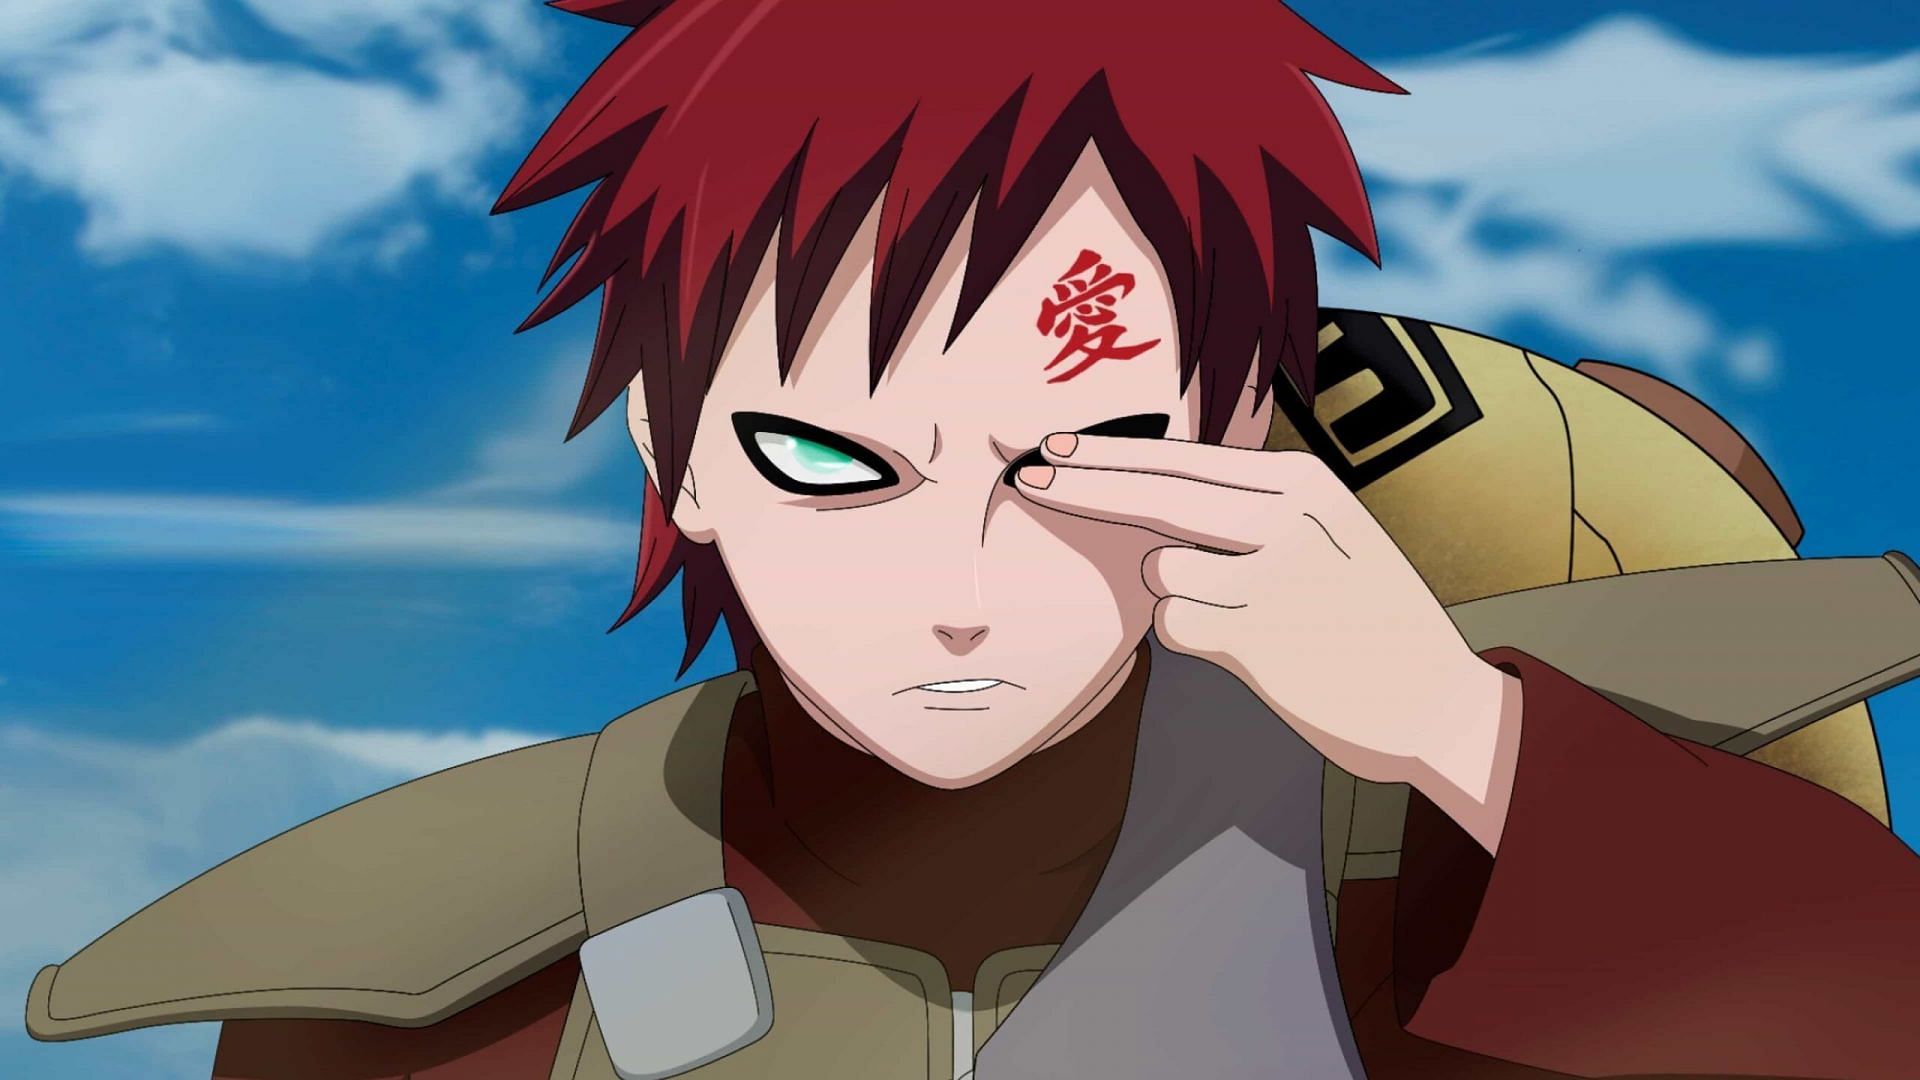 Gaara was a key player in the early stages of Naruto (Image via Studio Pierrot).